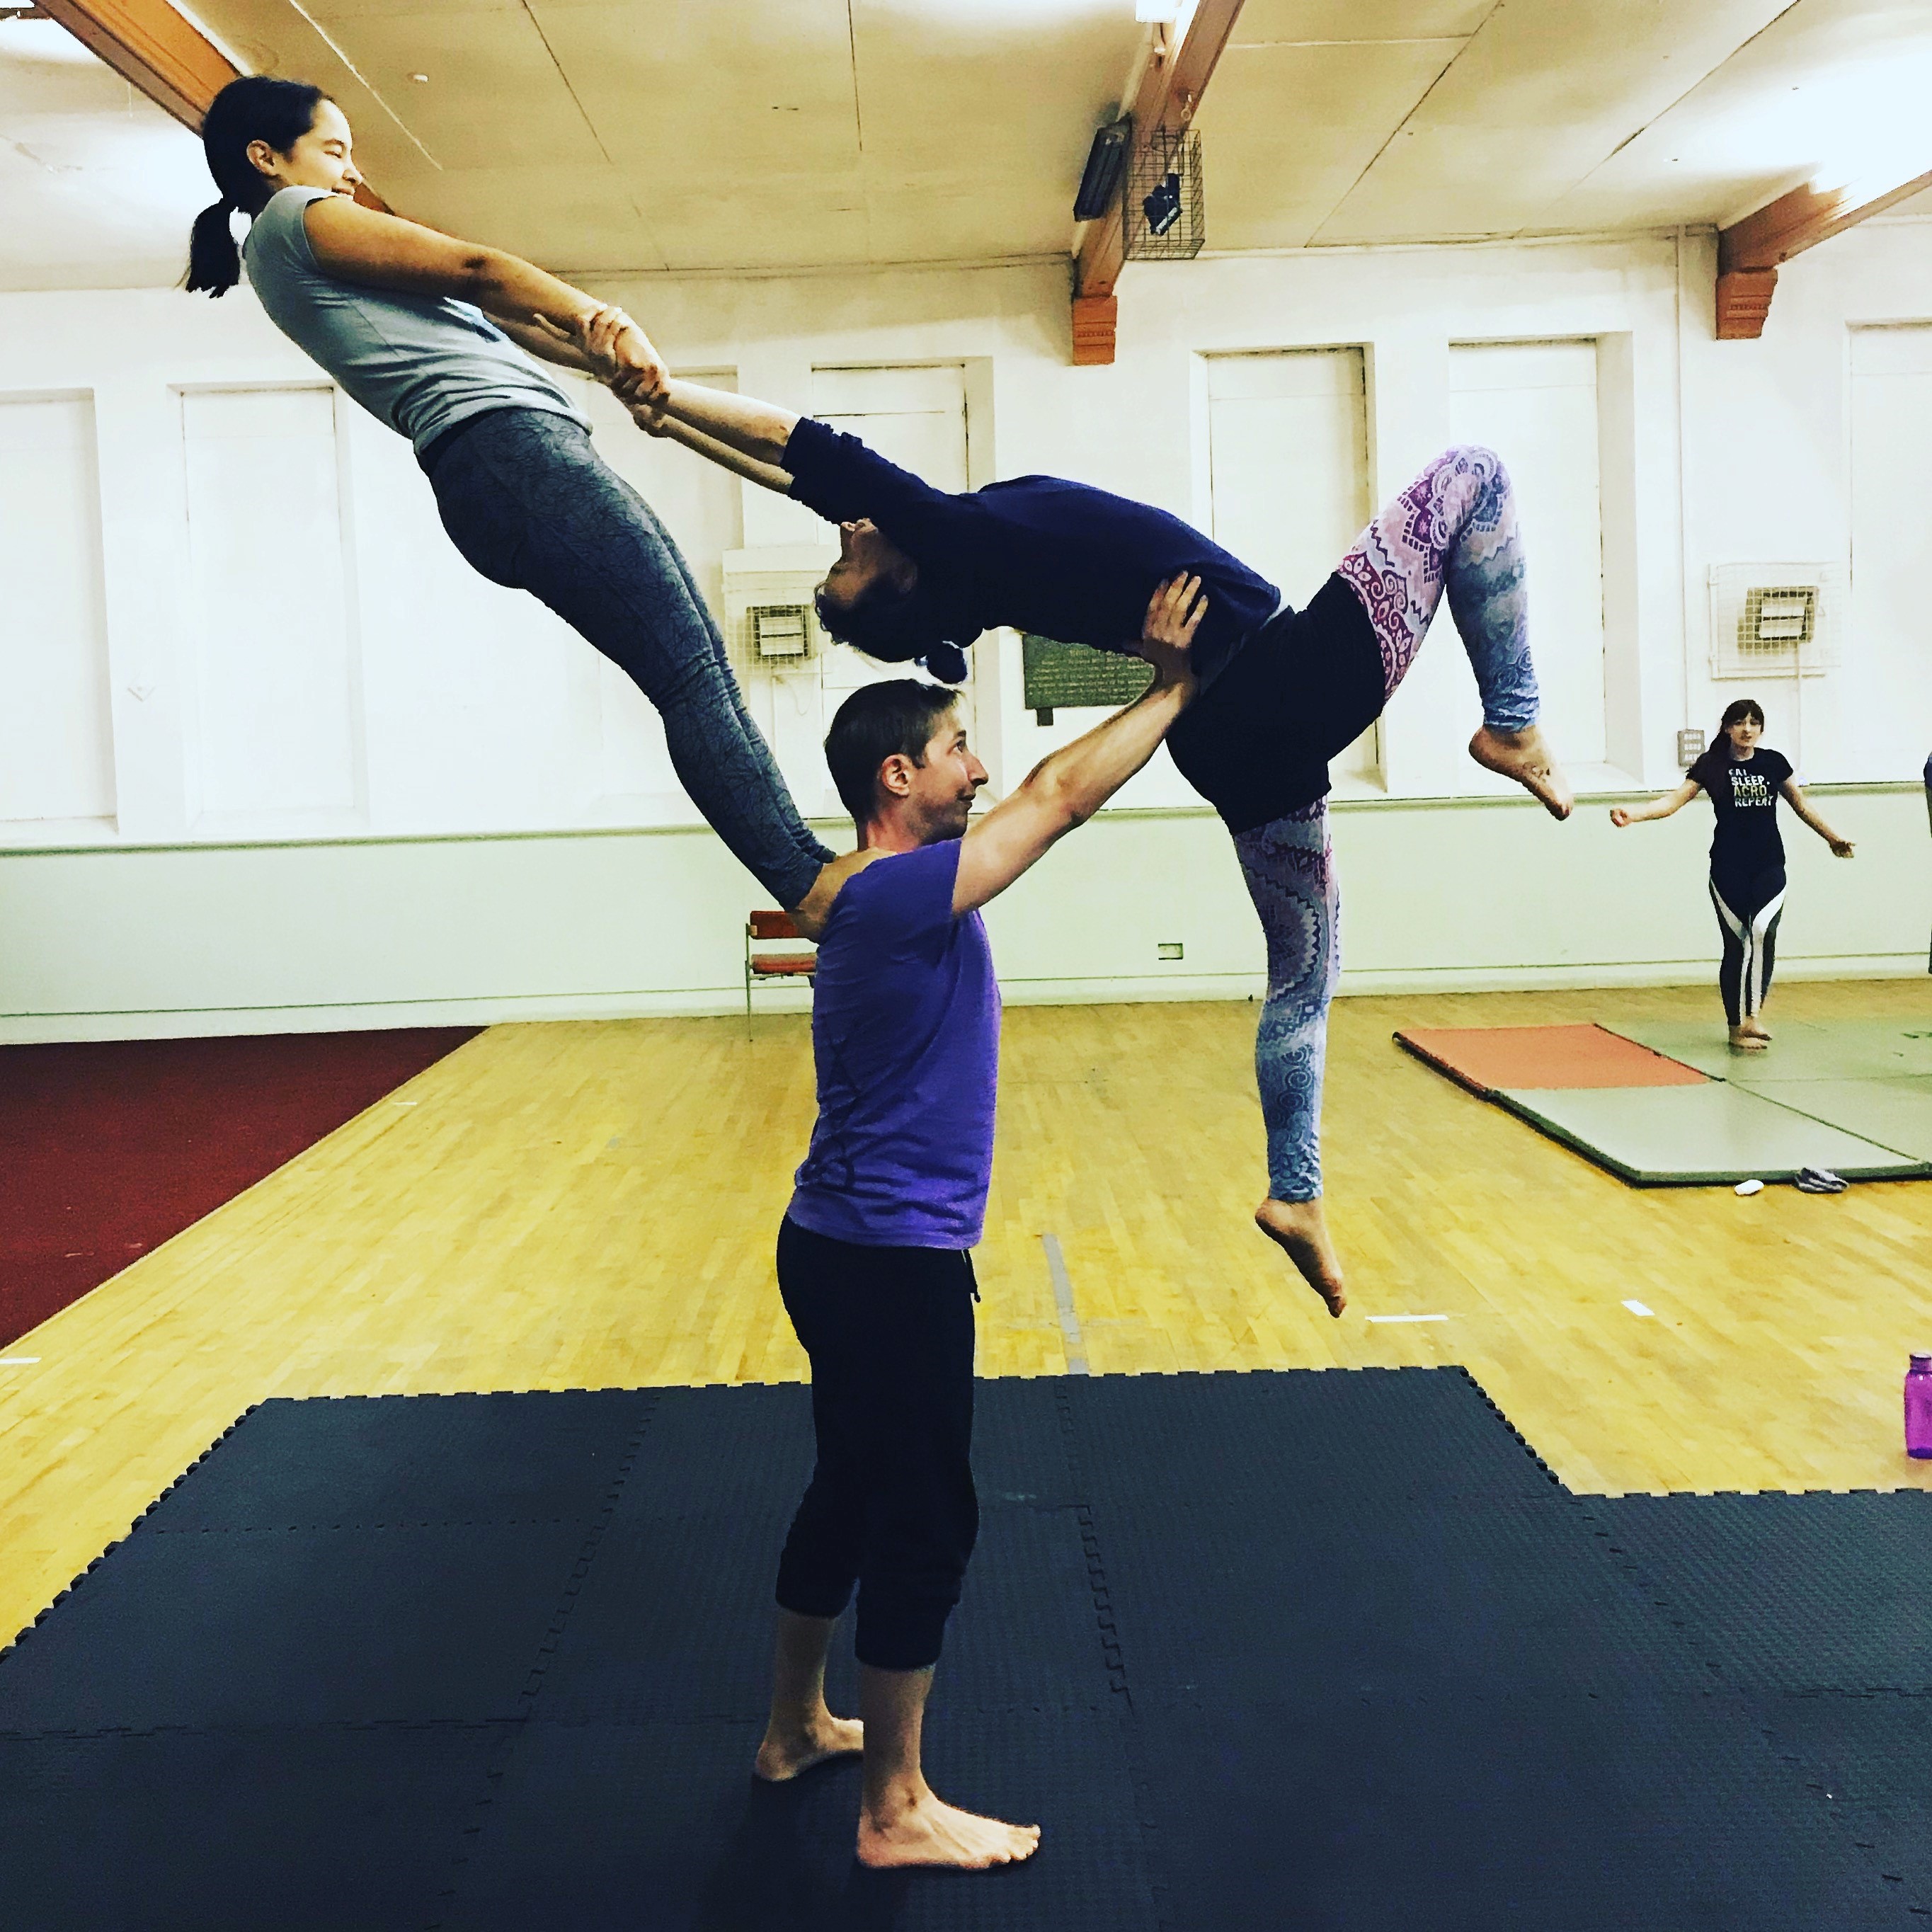 Ellie doing an acro balance move being held up by two other members. 